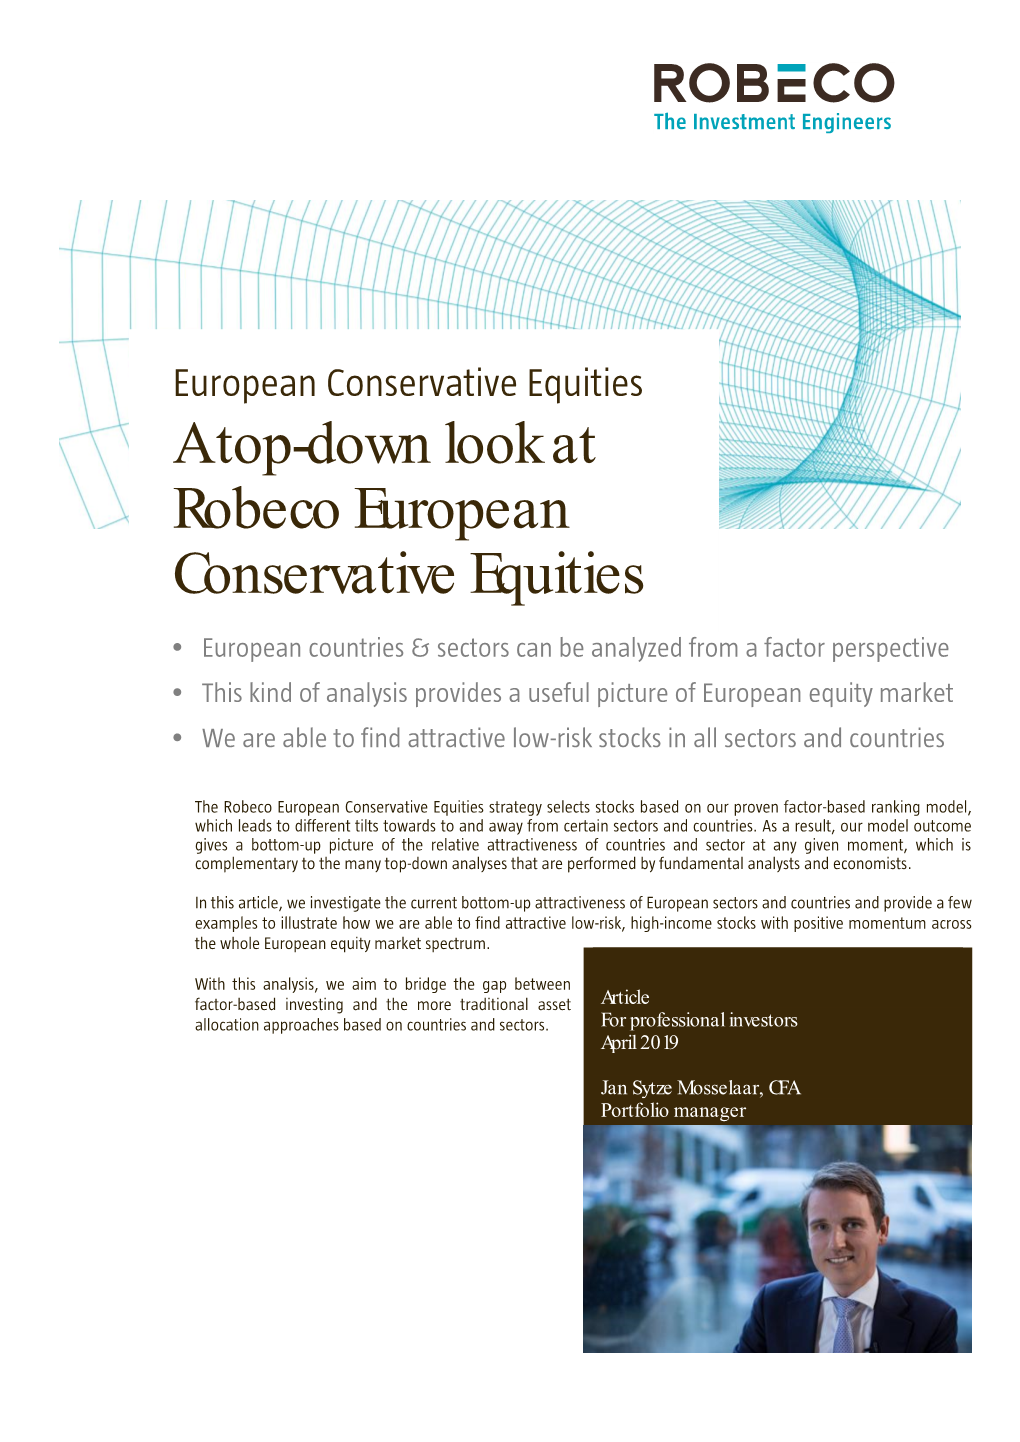 A Top-Down Look at Robeco European Conservative Equities